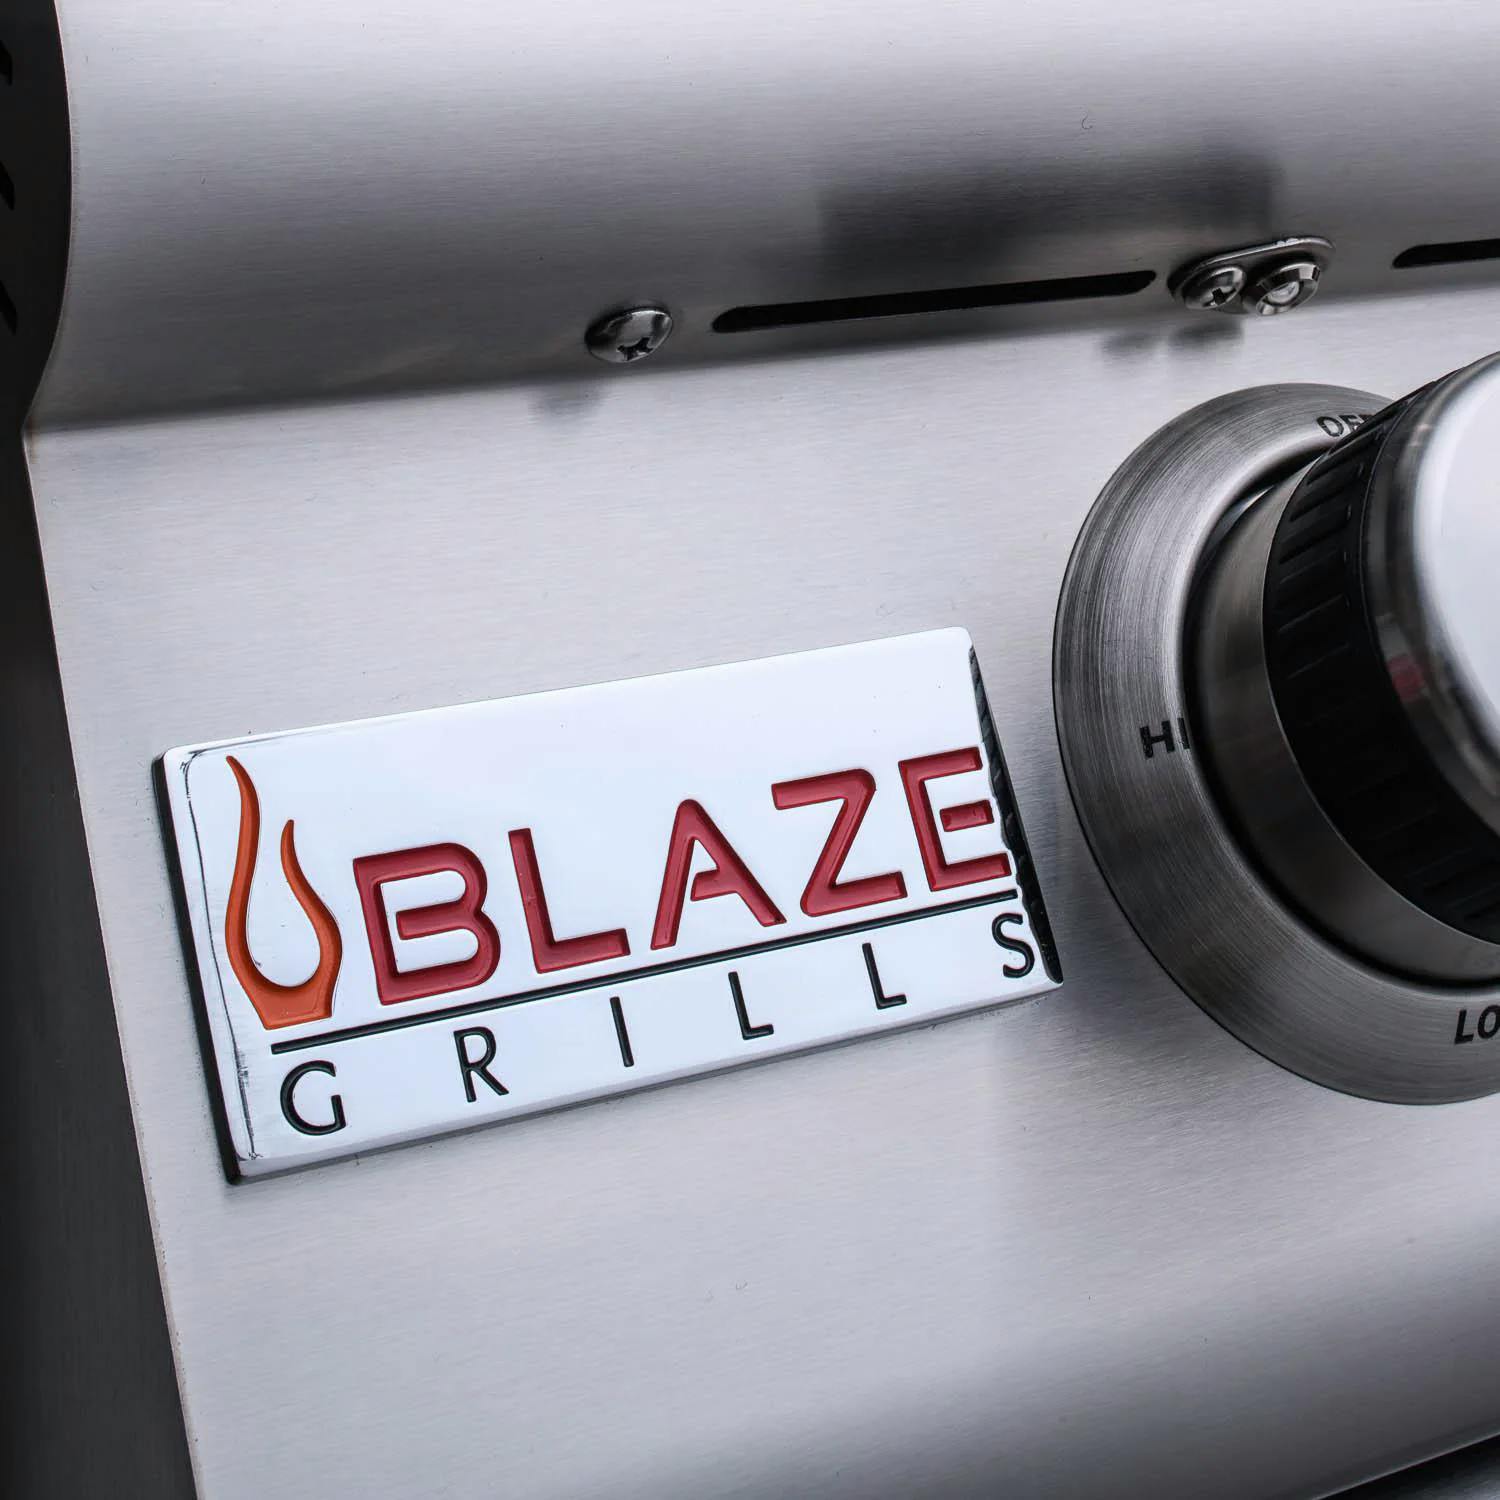 Blaze Premium LTE Marine Grade Built-In Gas Grill with Rear Infrared Burner and Grill Lights · 32 in. · Natural